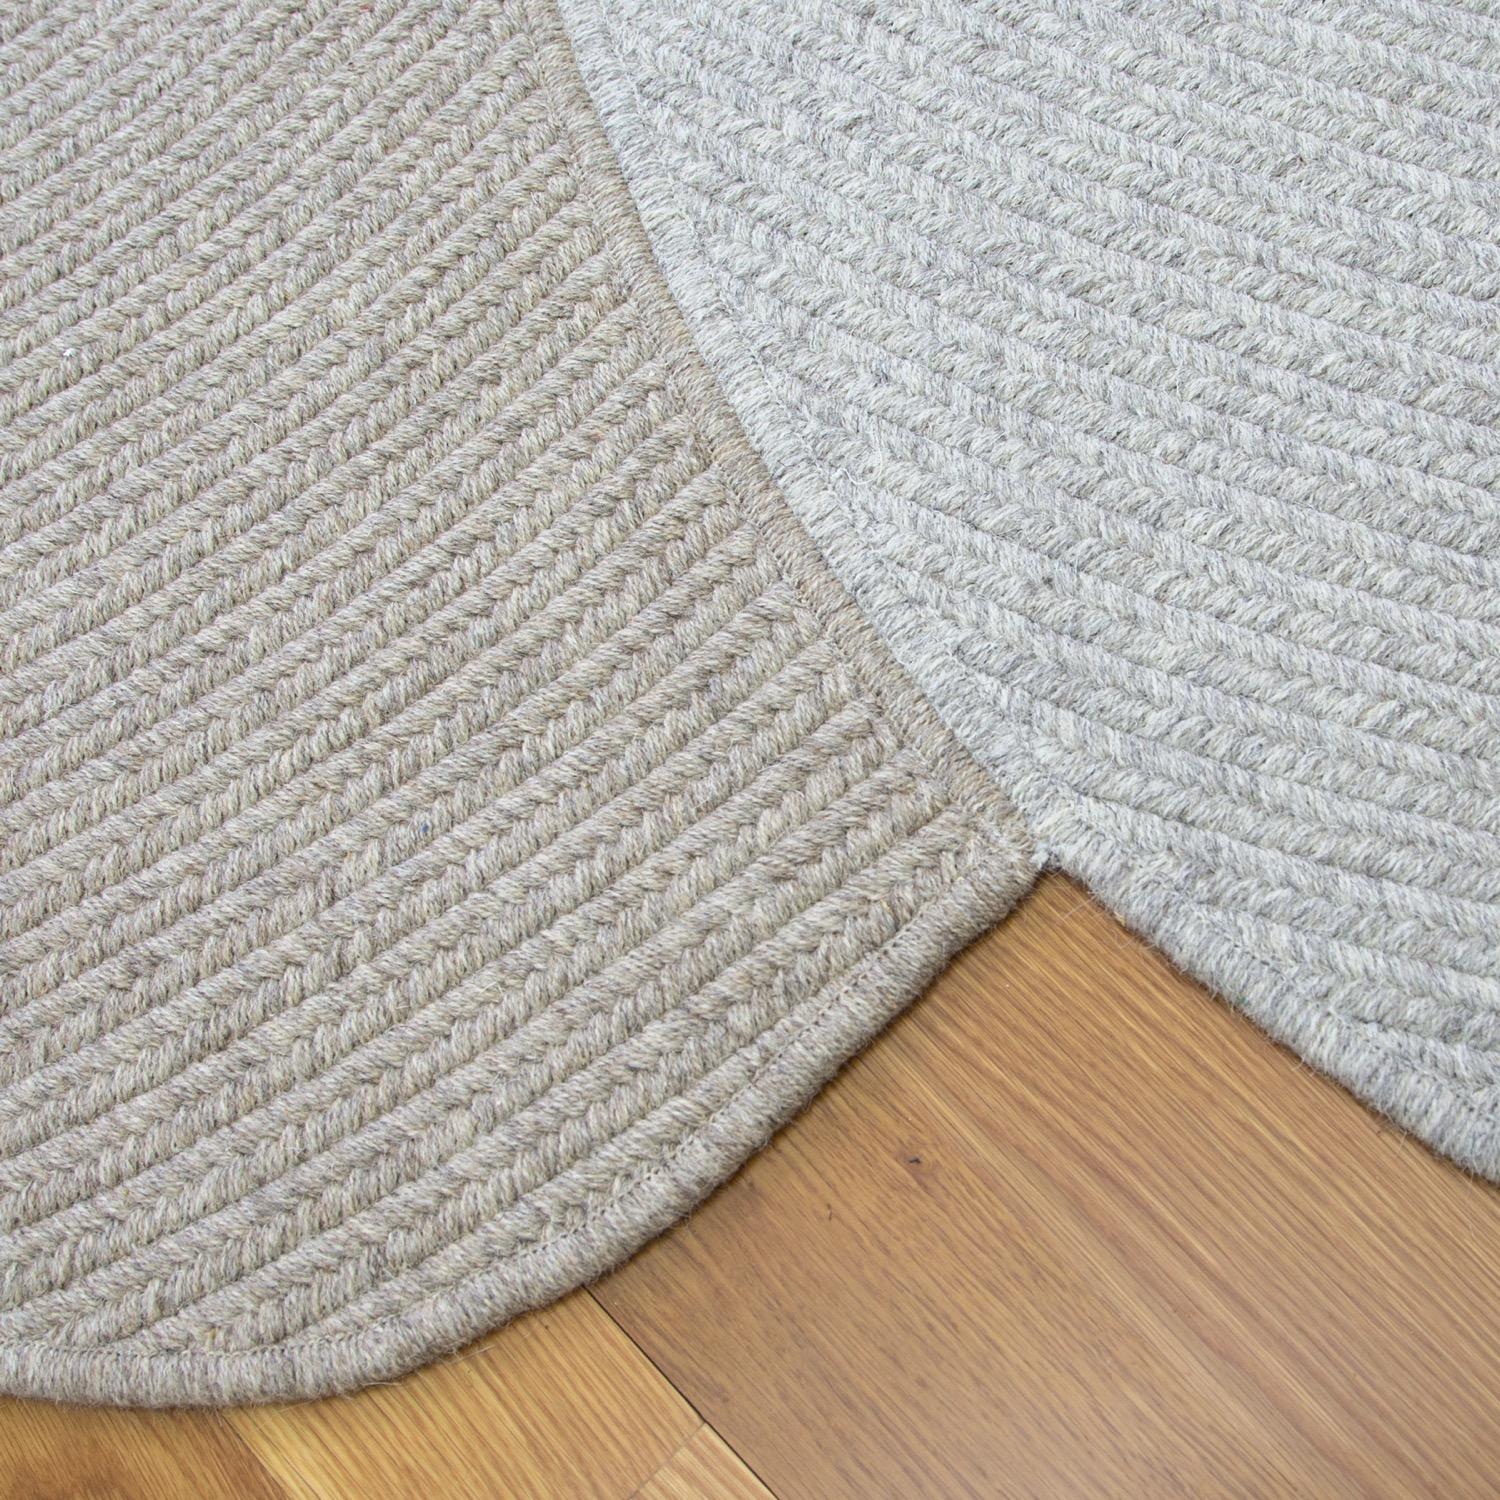 Riff Rug from Souda, 9x12 ft, Natural Wool, Light Grey In New Condition For Sale In Brooklyn, NY